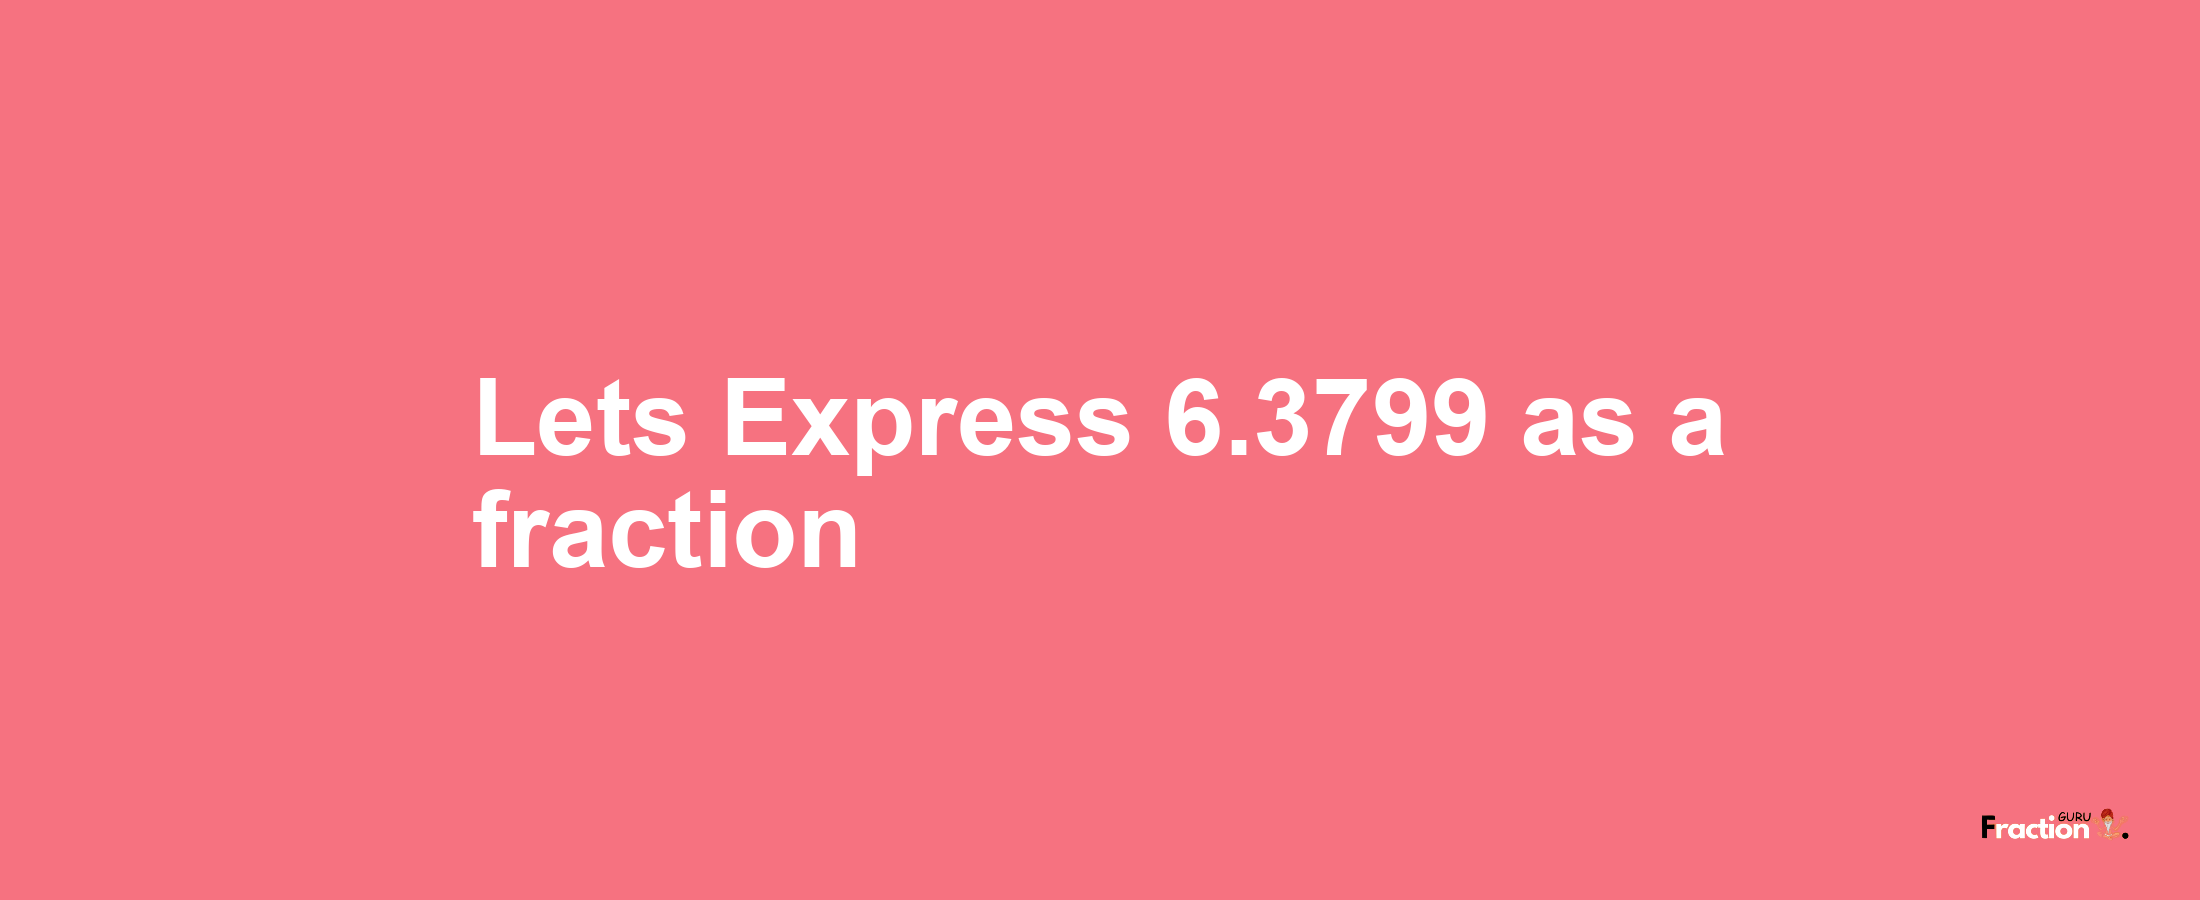 Lets Express 6.3799 as afraction